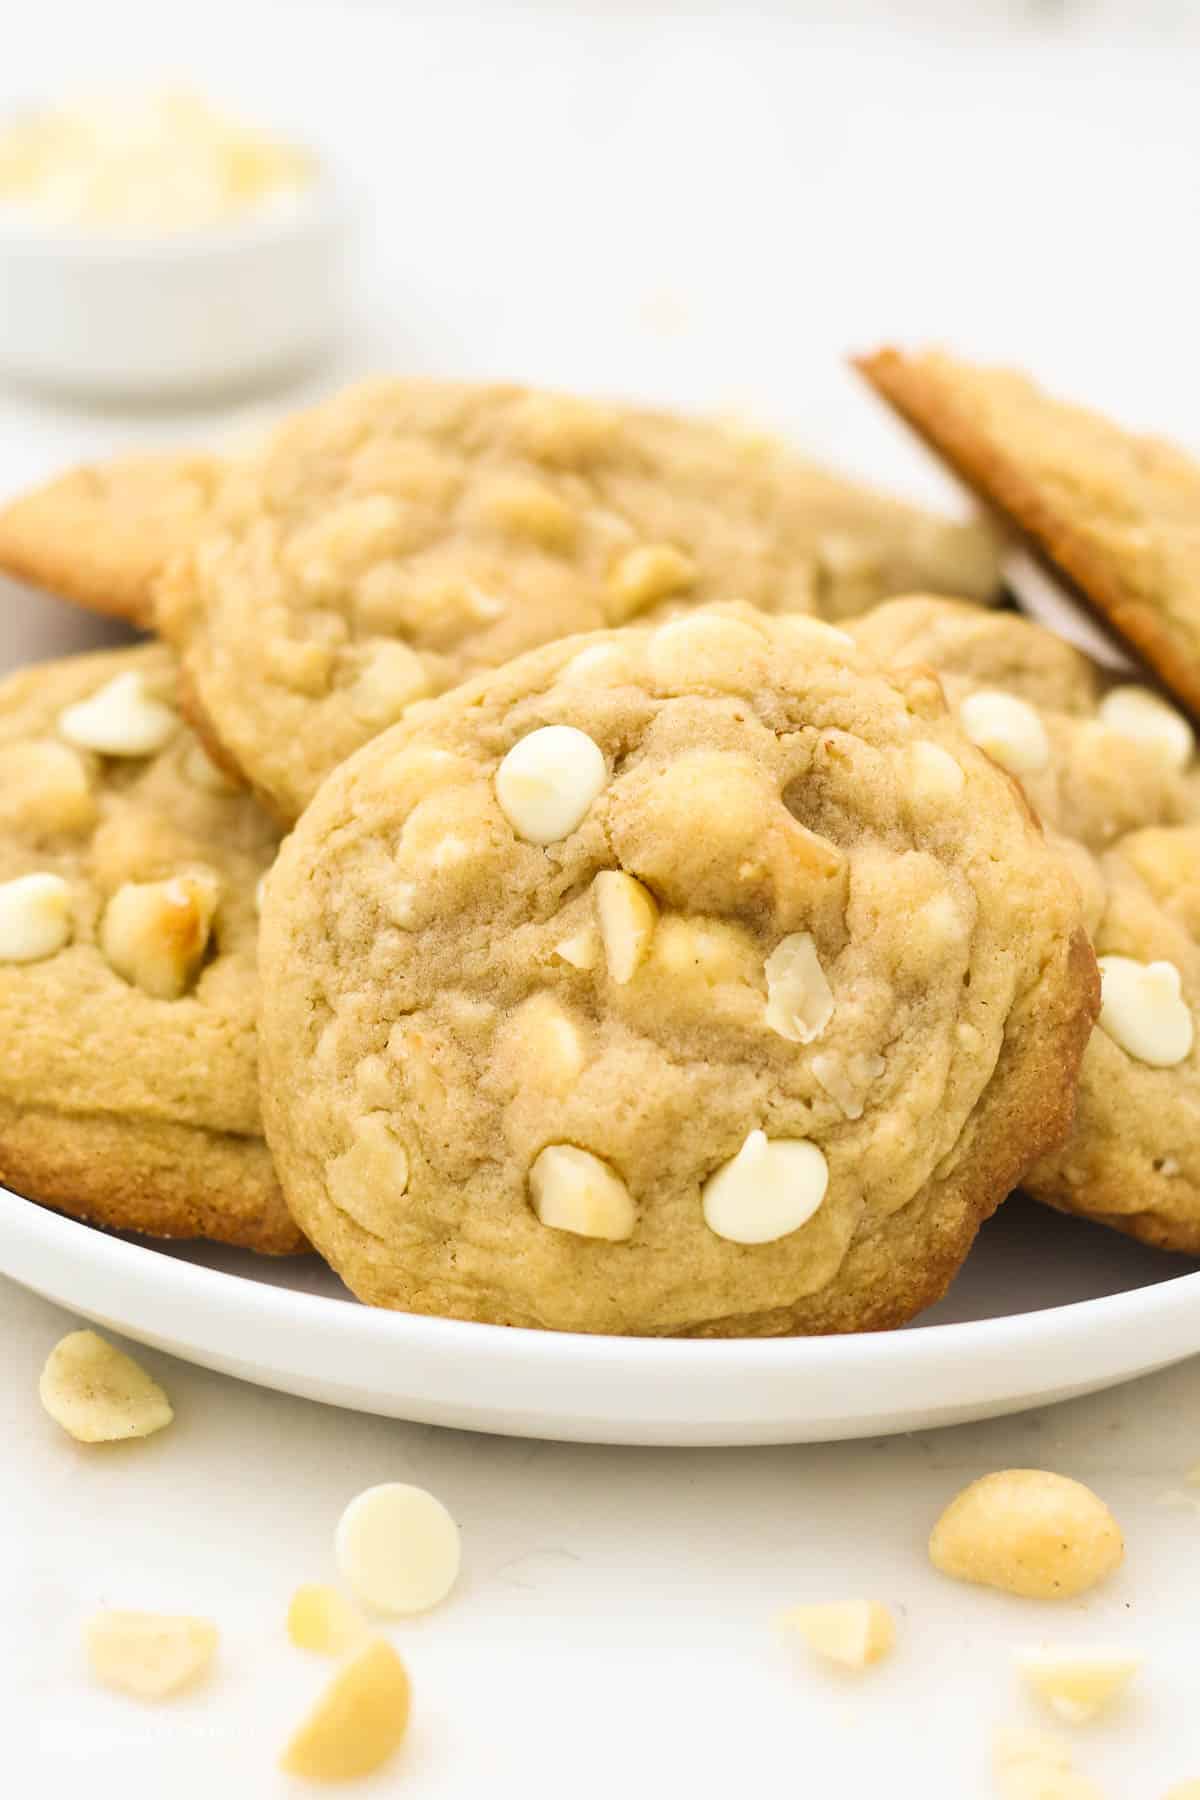 White Chocolate Macadamia Nut Cookies Piled Up on a White Plate